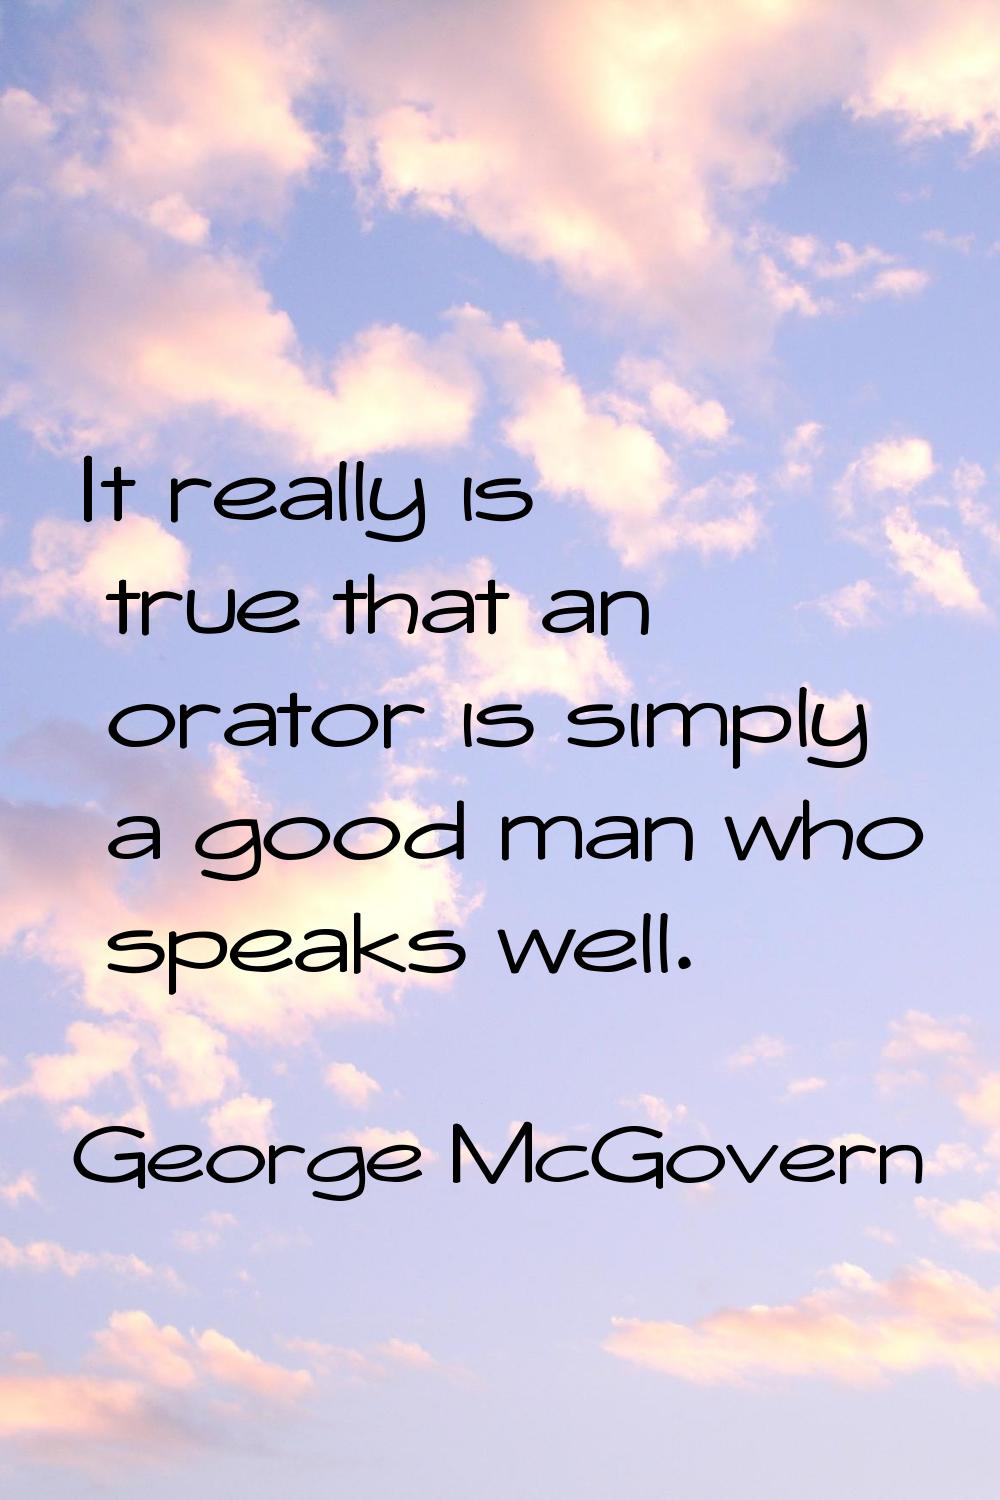 It really is true that an orator is simply a good man who speaks well.